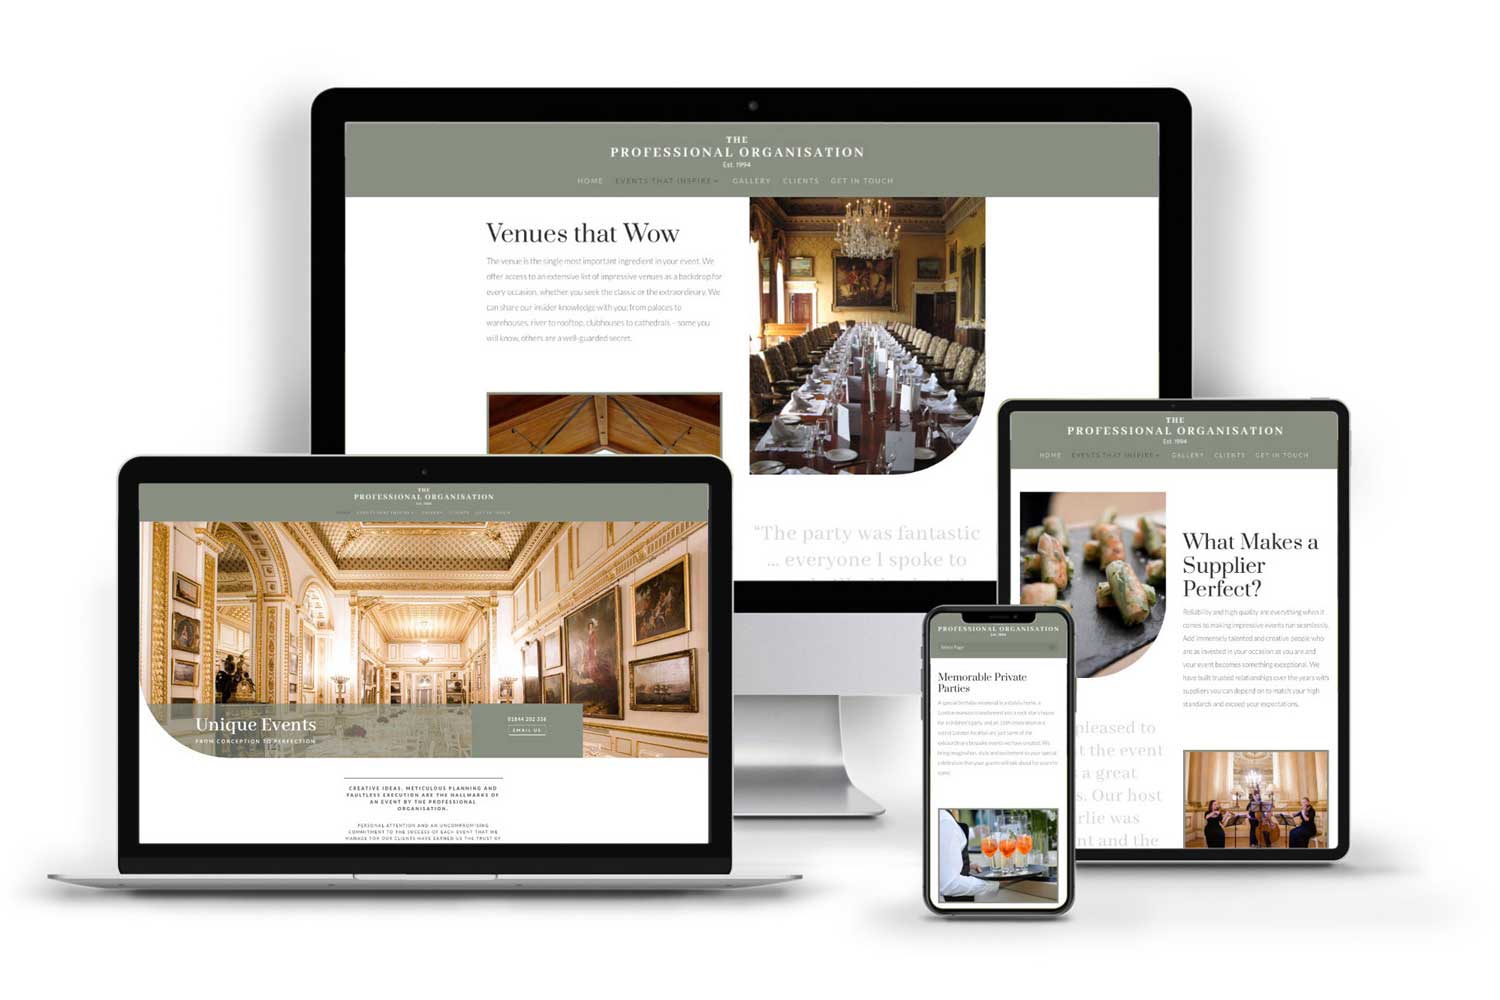 A responsive website shown on different screens, designed by a Thame website designer for a Long Crendon events organiser